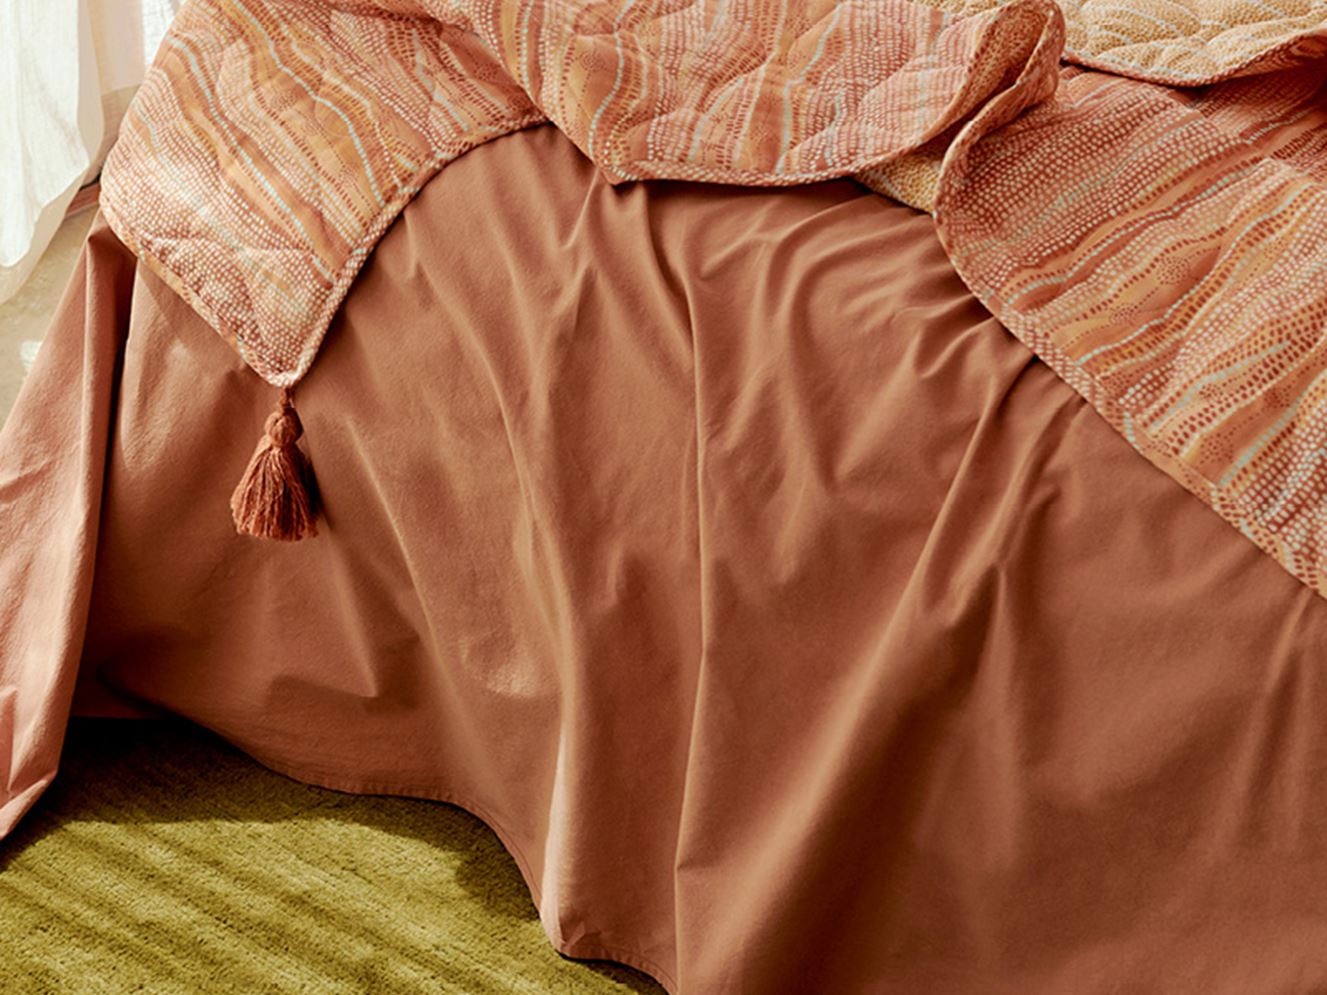 Solid earth coloured sheets styled on a bed, with a coverlet draped naturally over the top in contrasting lighter hues of orange, pink and yellow.